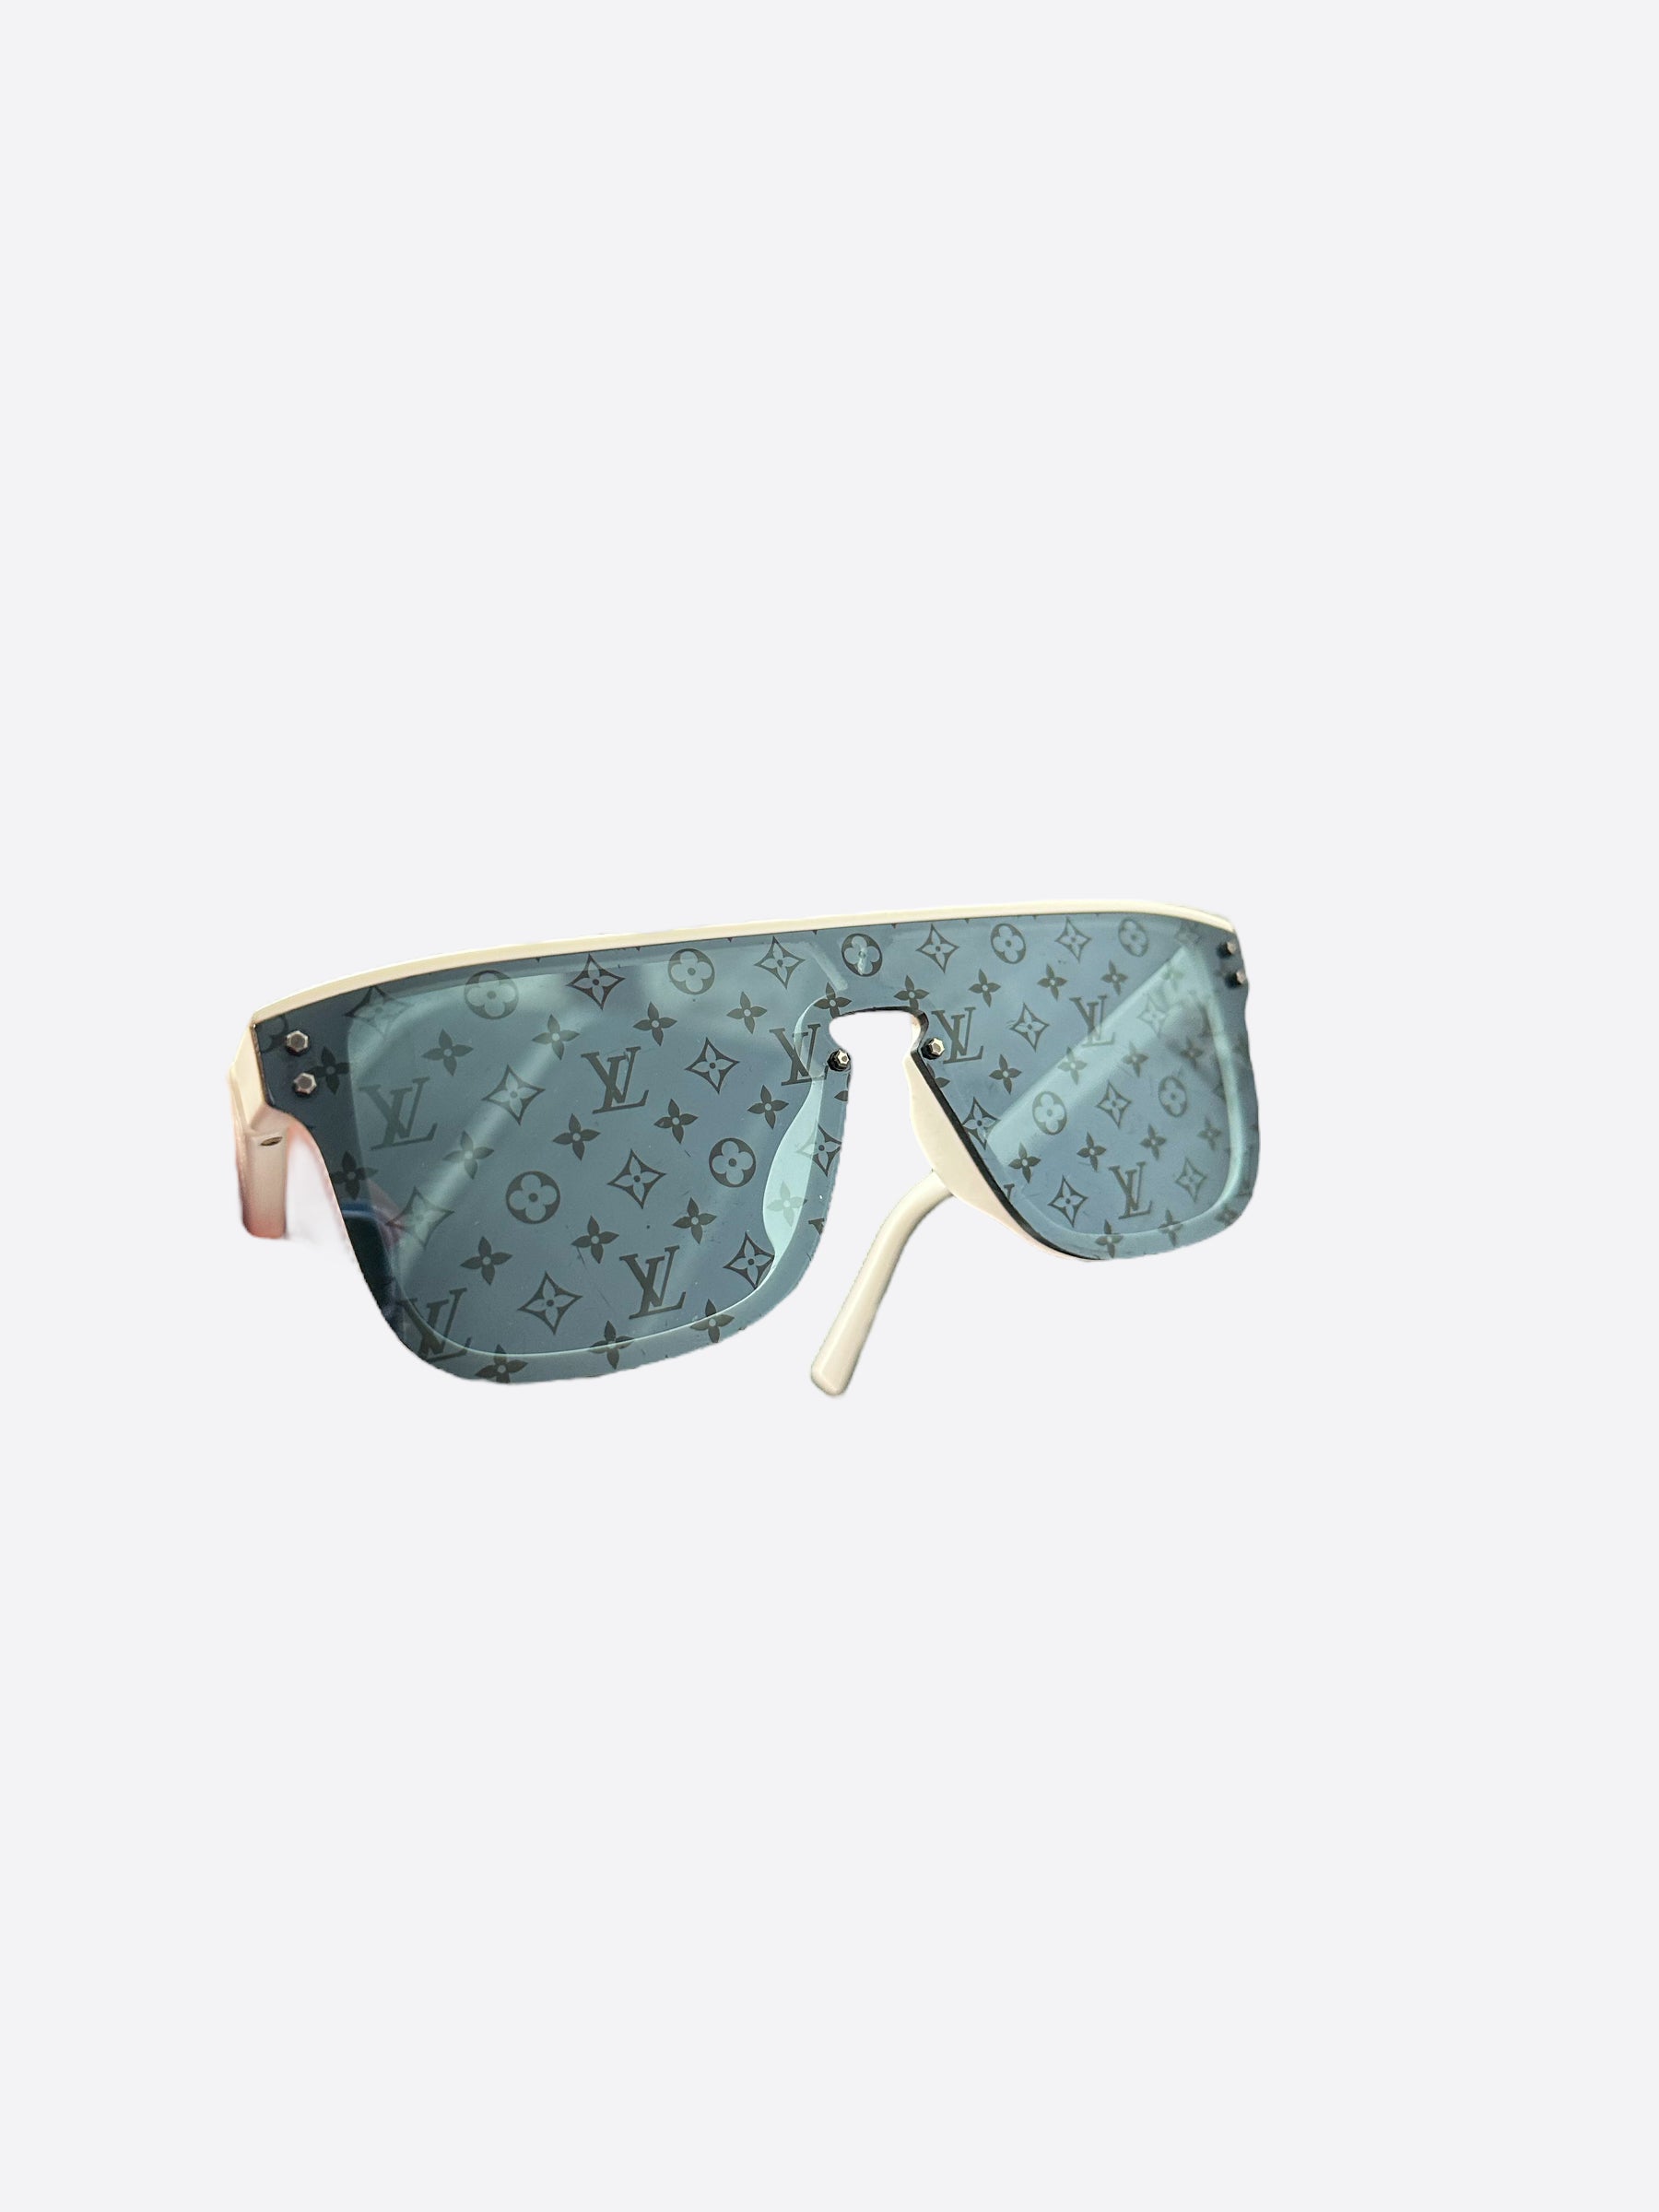 Louis Vuitton Sunglasses LV Waimea Round for Sale in Biscayne Park